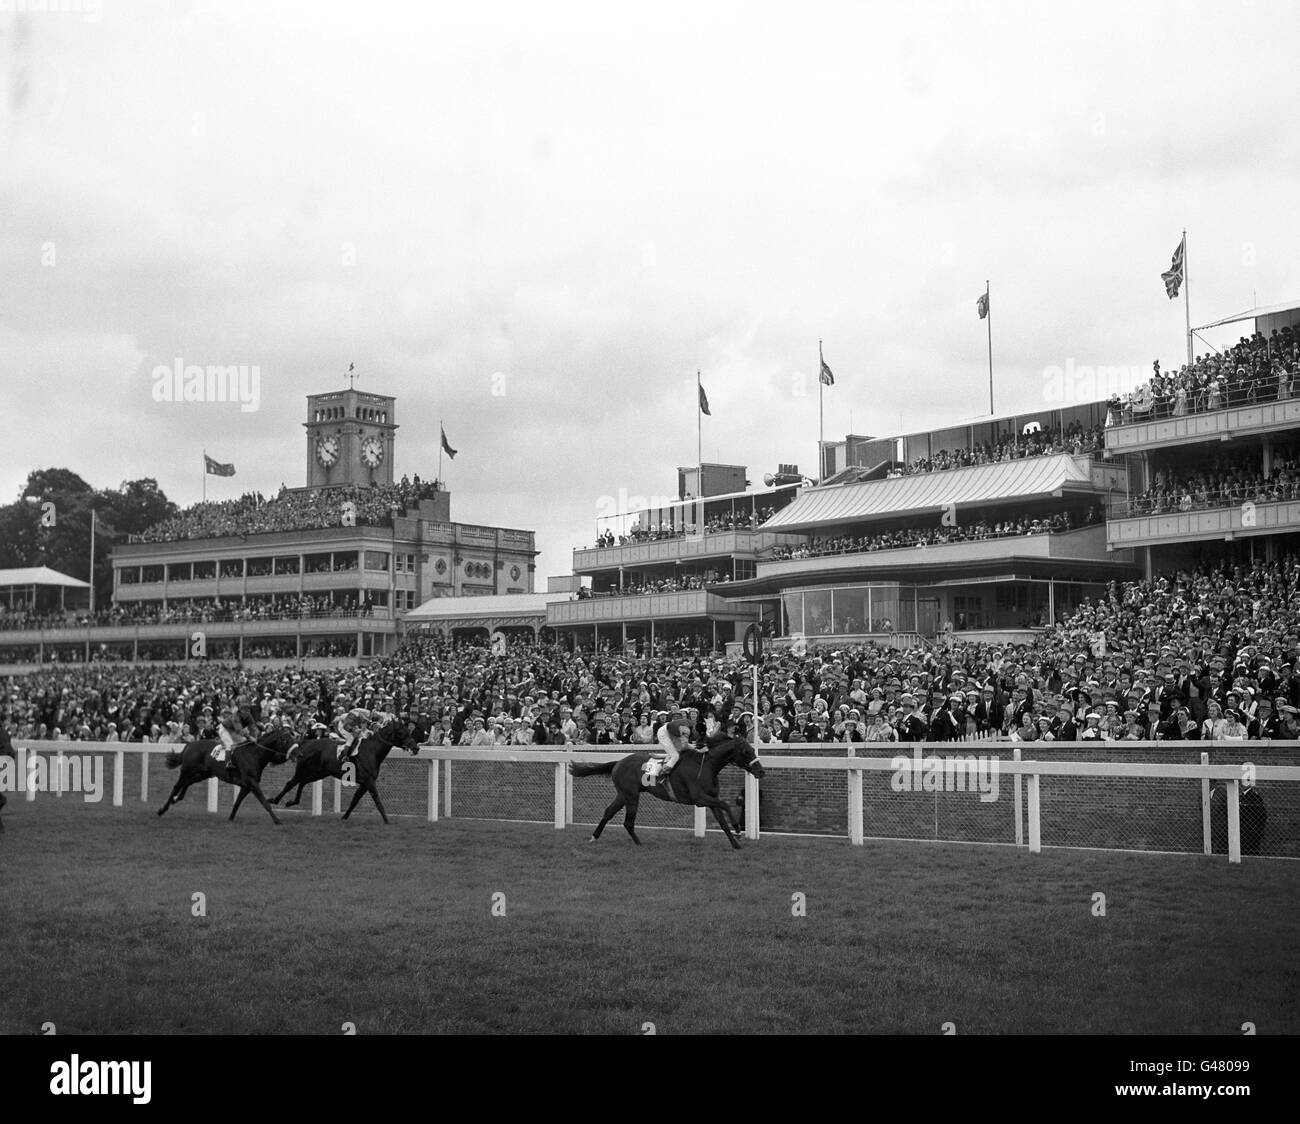 Horse Racing - Royal Ascot - Ascot Racecourse. Alexander, ridden by WH Carr, wins the Royal Hunt Cup at Royal Ascot Stock Photo